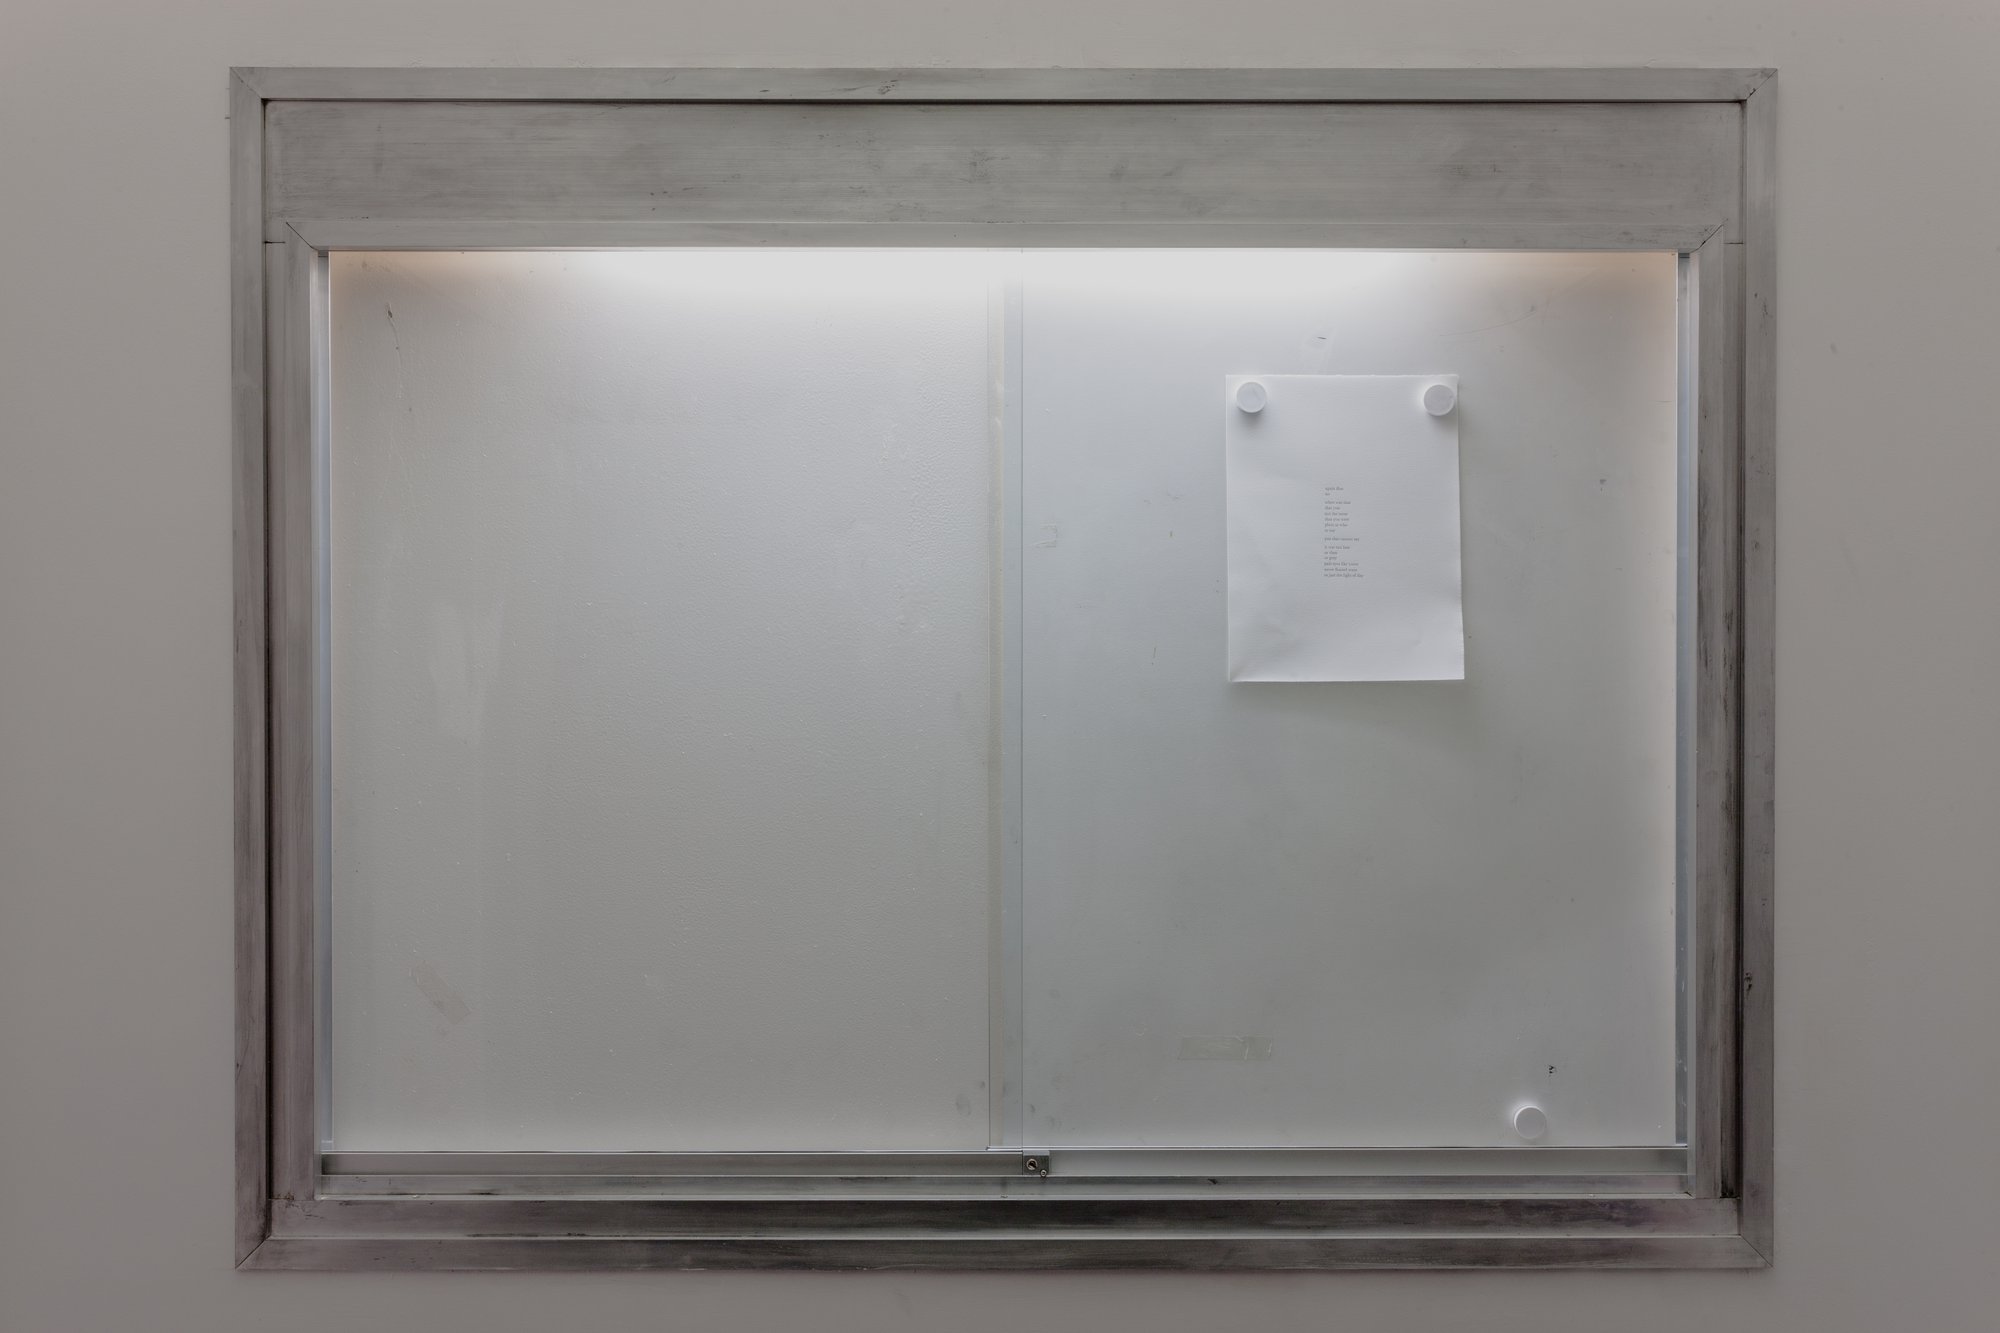 Duncan Campbell, Untitled, found metal vitrine and poem, 123.2 x 158.3 x 12 cm (48 1/2 x 62 3/8 x 4 3/4 in), 2015